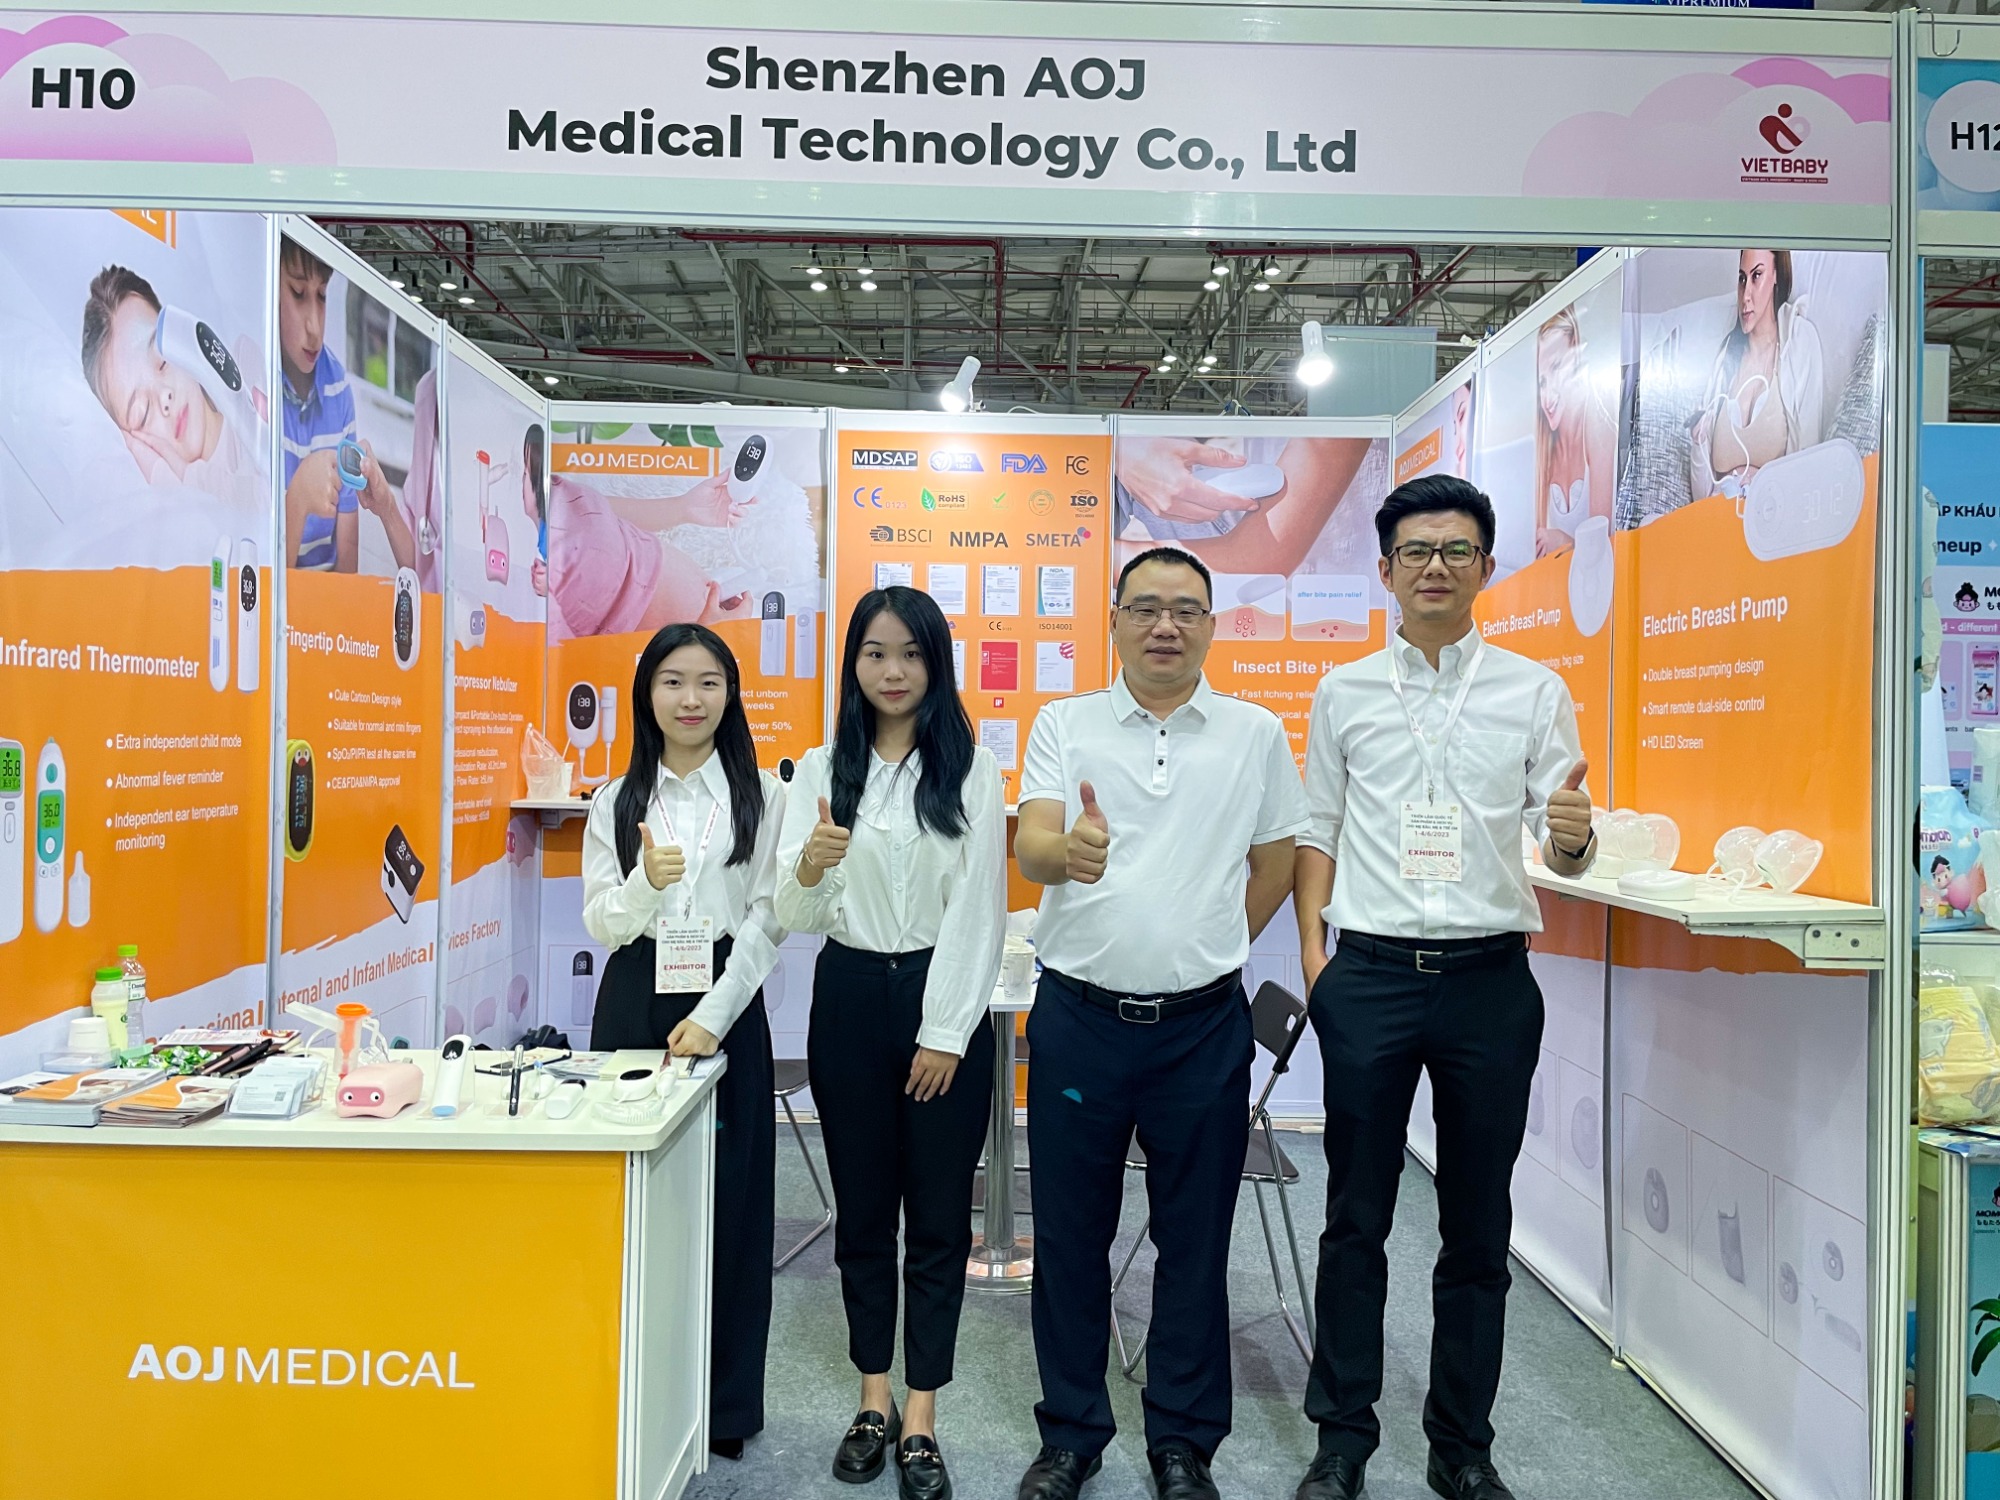 The AOJ MEDICAL team showcased their latest maternal and child health product line at the most influential maternal and child exhibition VIETBABY held